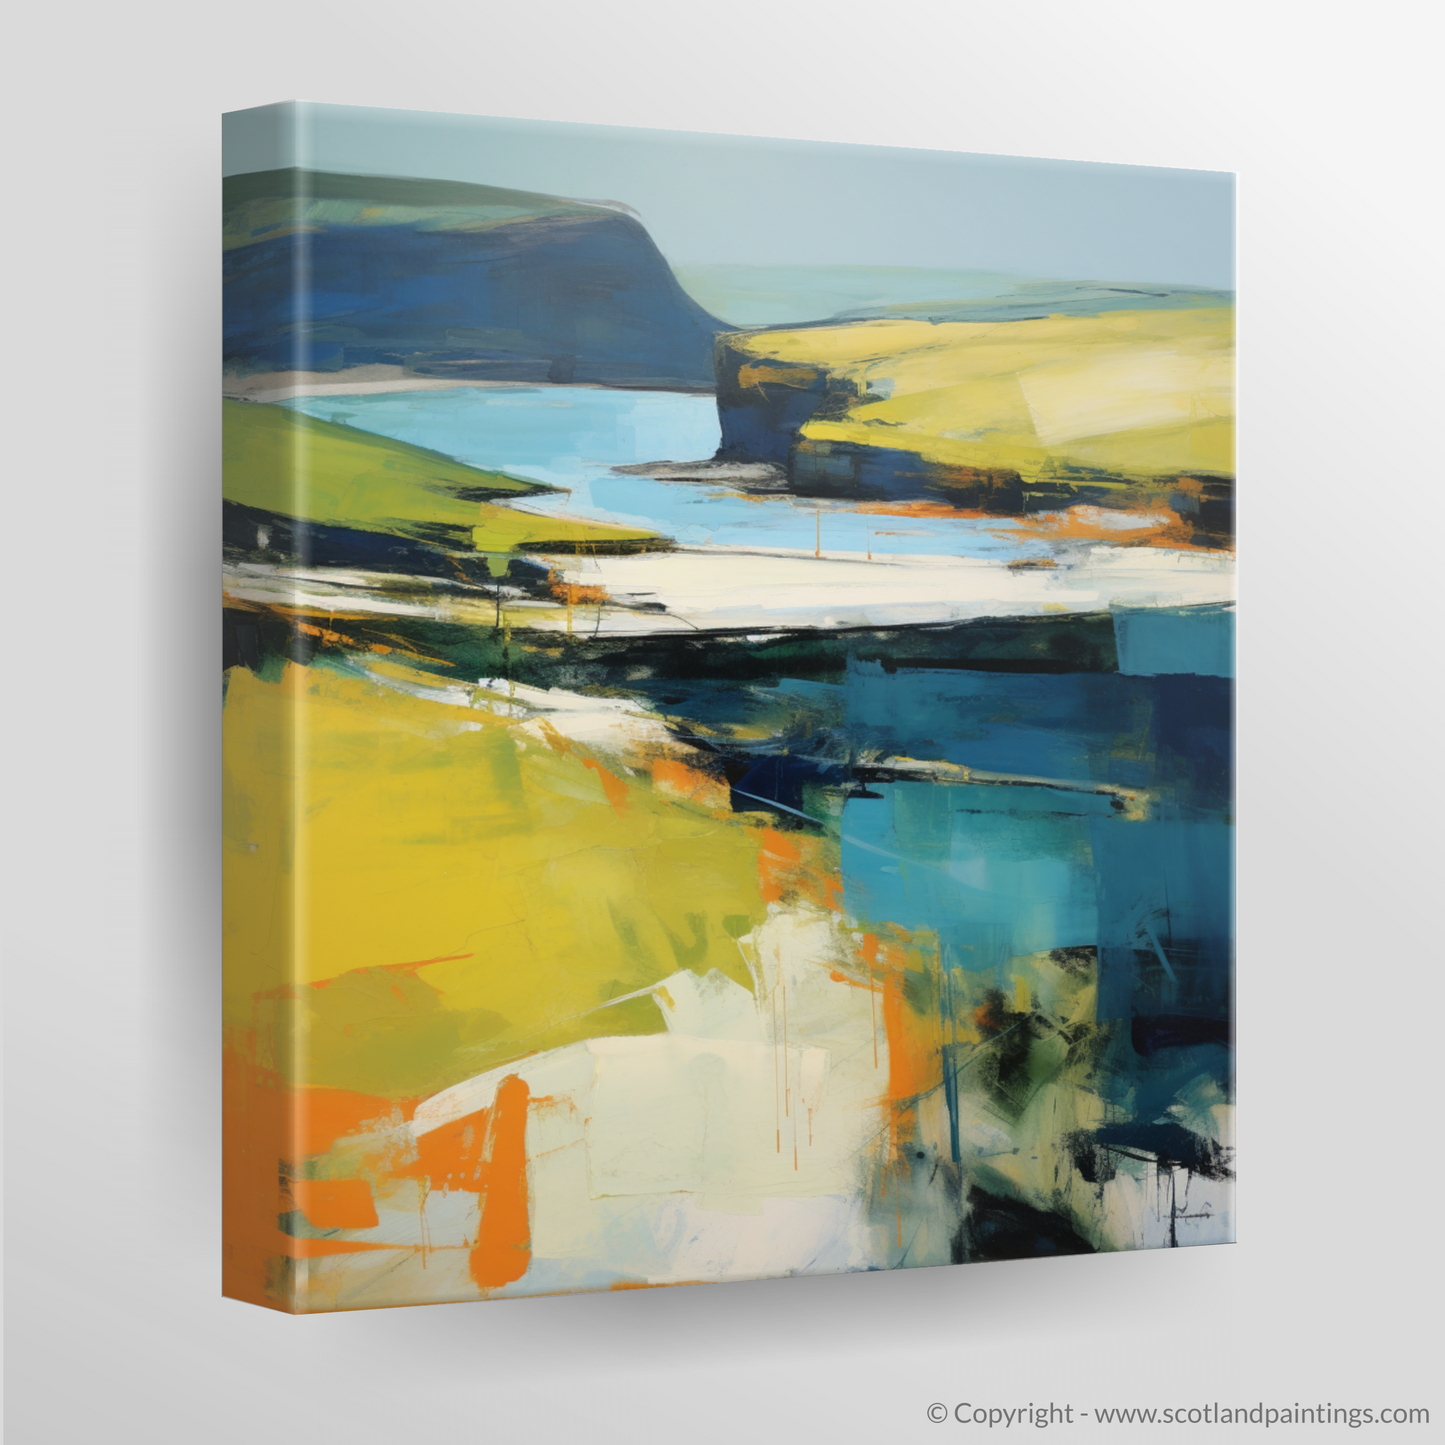 Calgary Bay Dreamscape: An Abstract Impressionist Ode to Scottish Shores